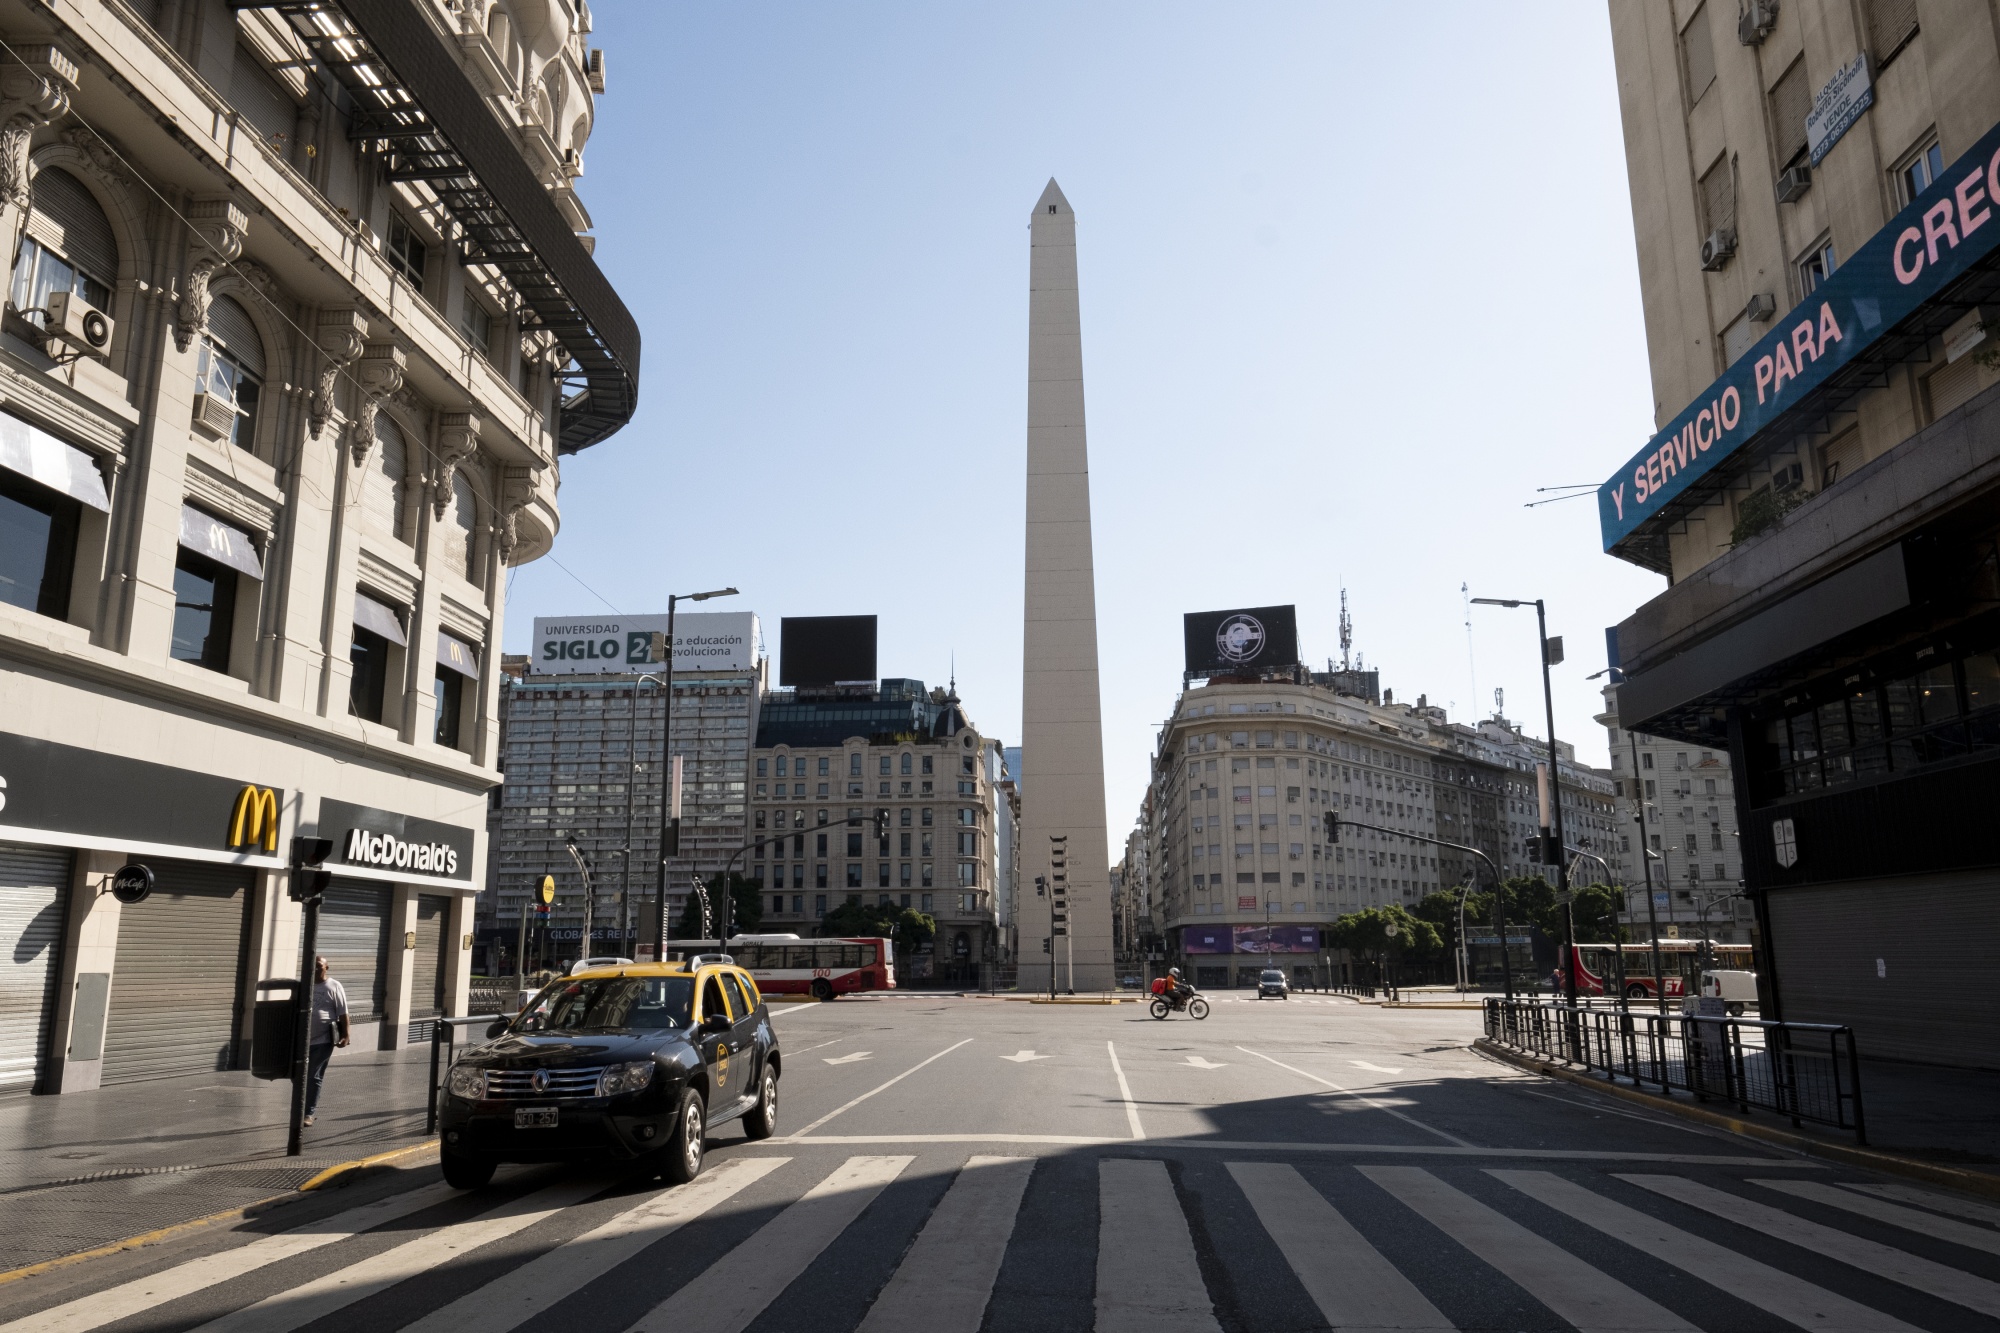 Argentina Floods Empty Streets With Cash as Crisis Lending Grows